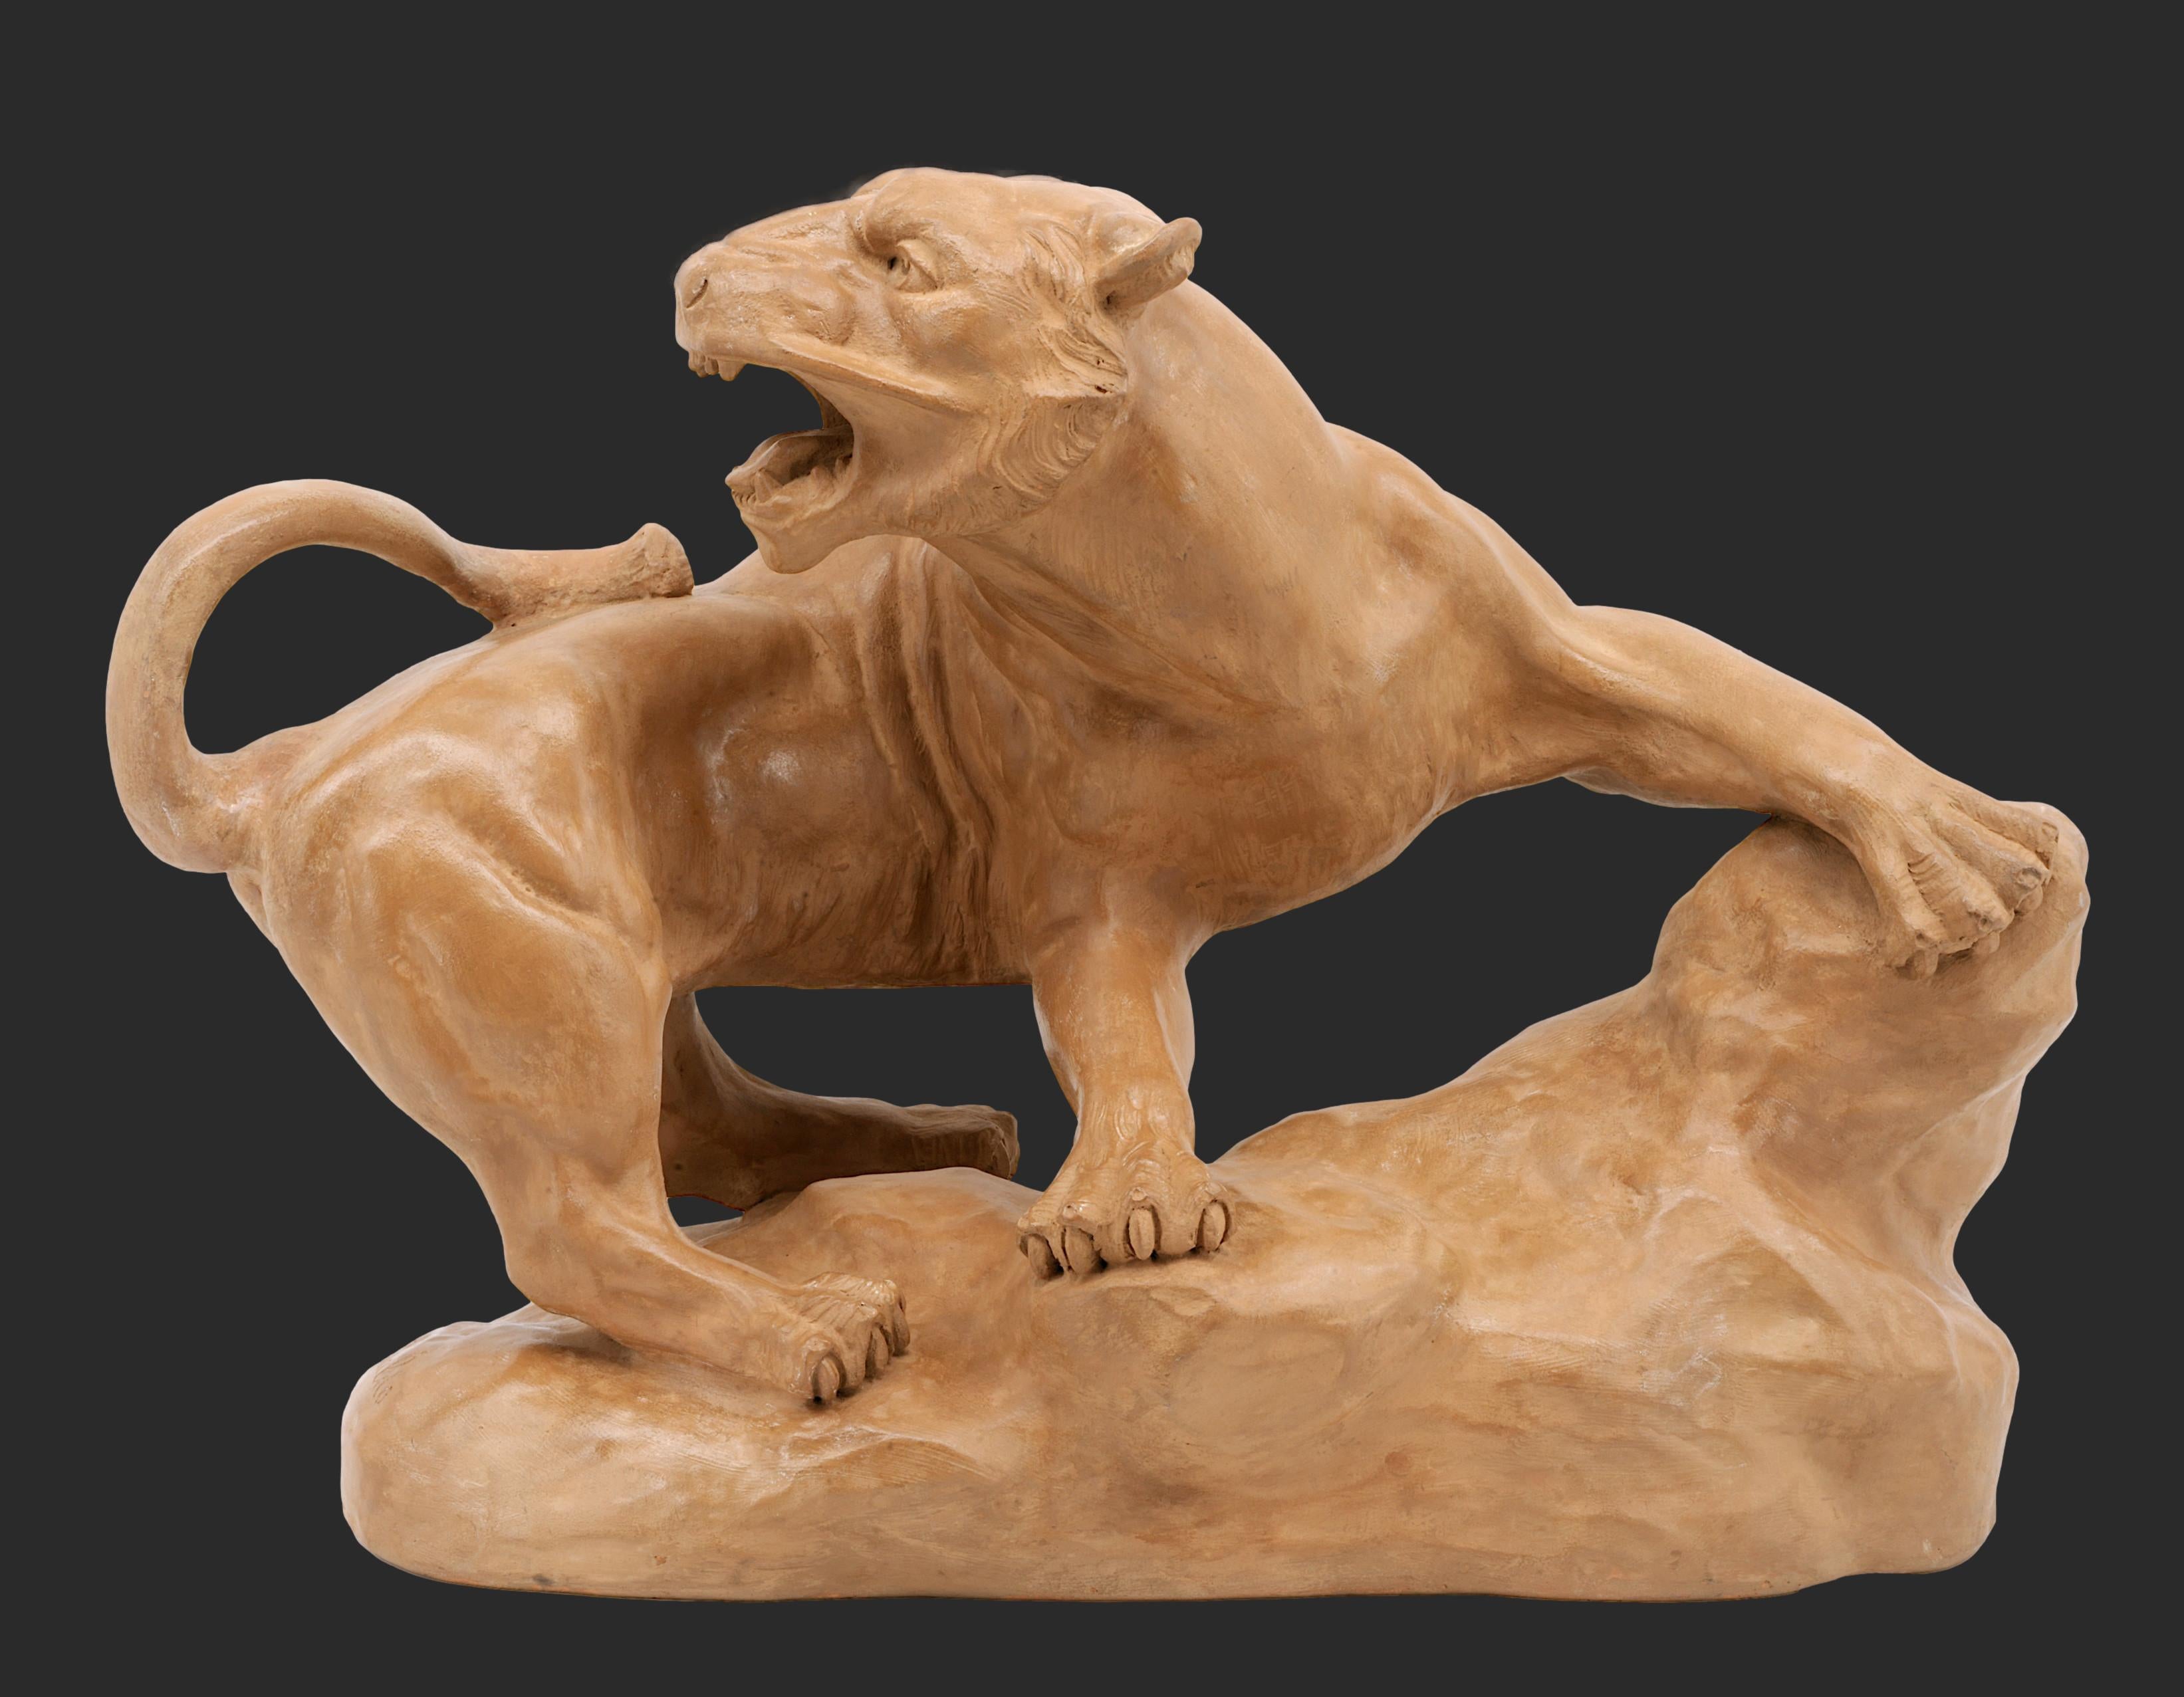 French Art Deco terracotta sculpture by Antoine Capaldo, sculptor who produced in the late 19th and early 20th century present at the Salon des Artistes Français in the 1910s. Edited by Fontaine & Durieux, Paris, France, circa 1920. Lioness.